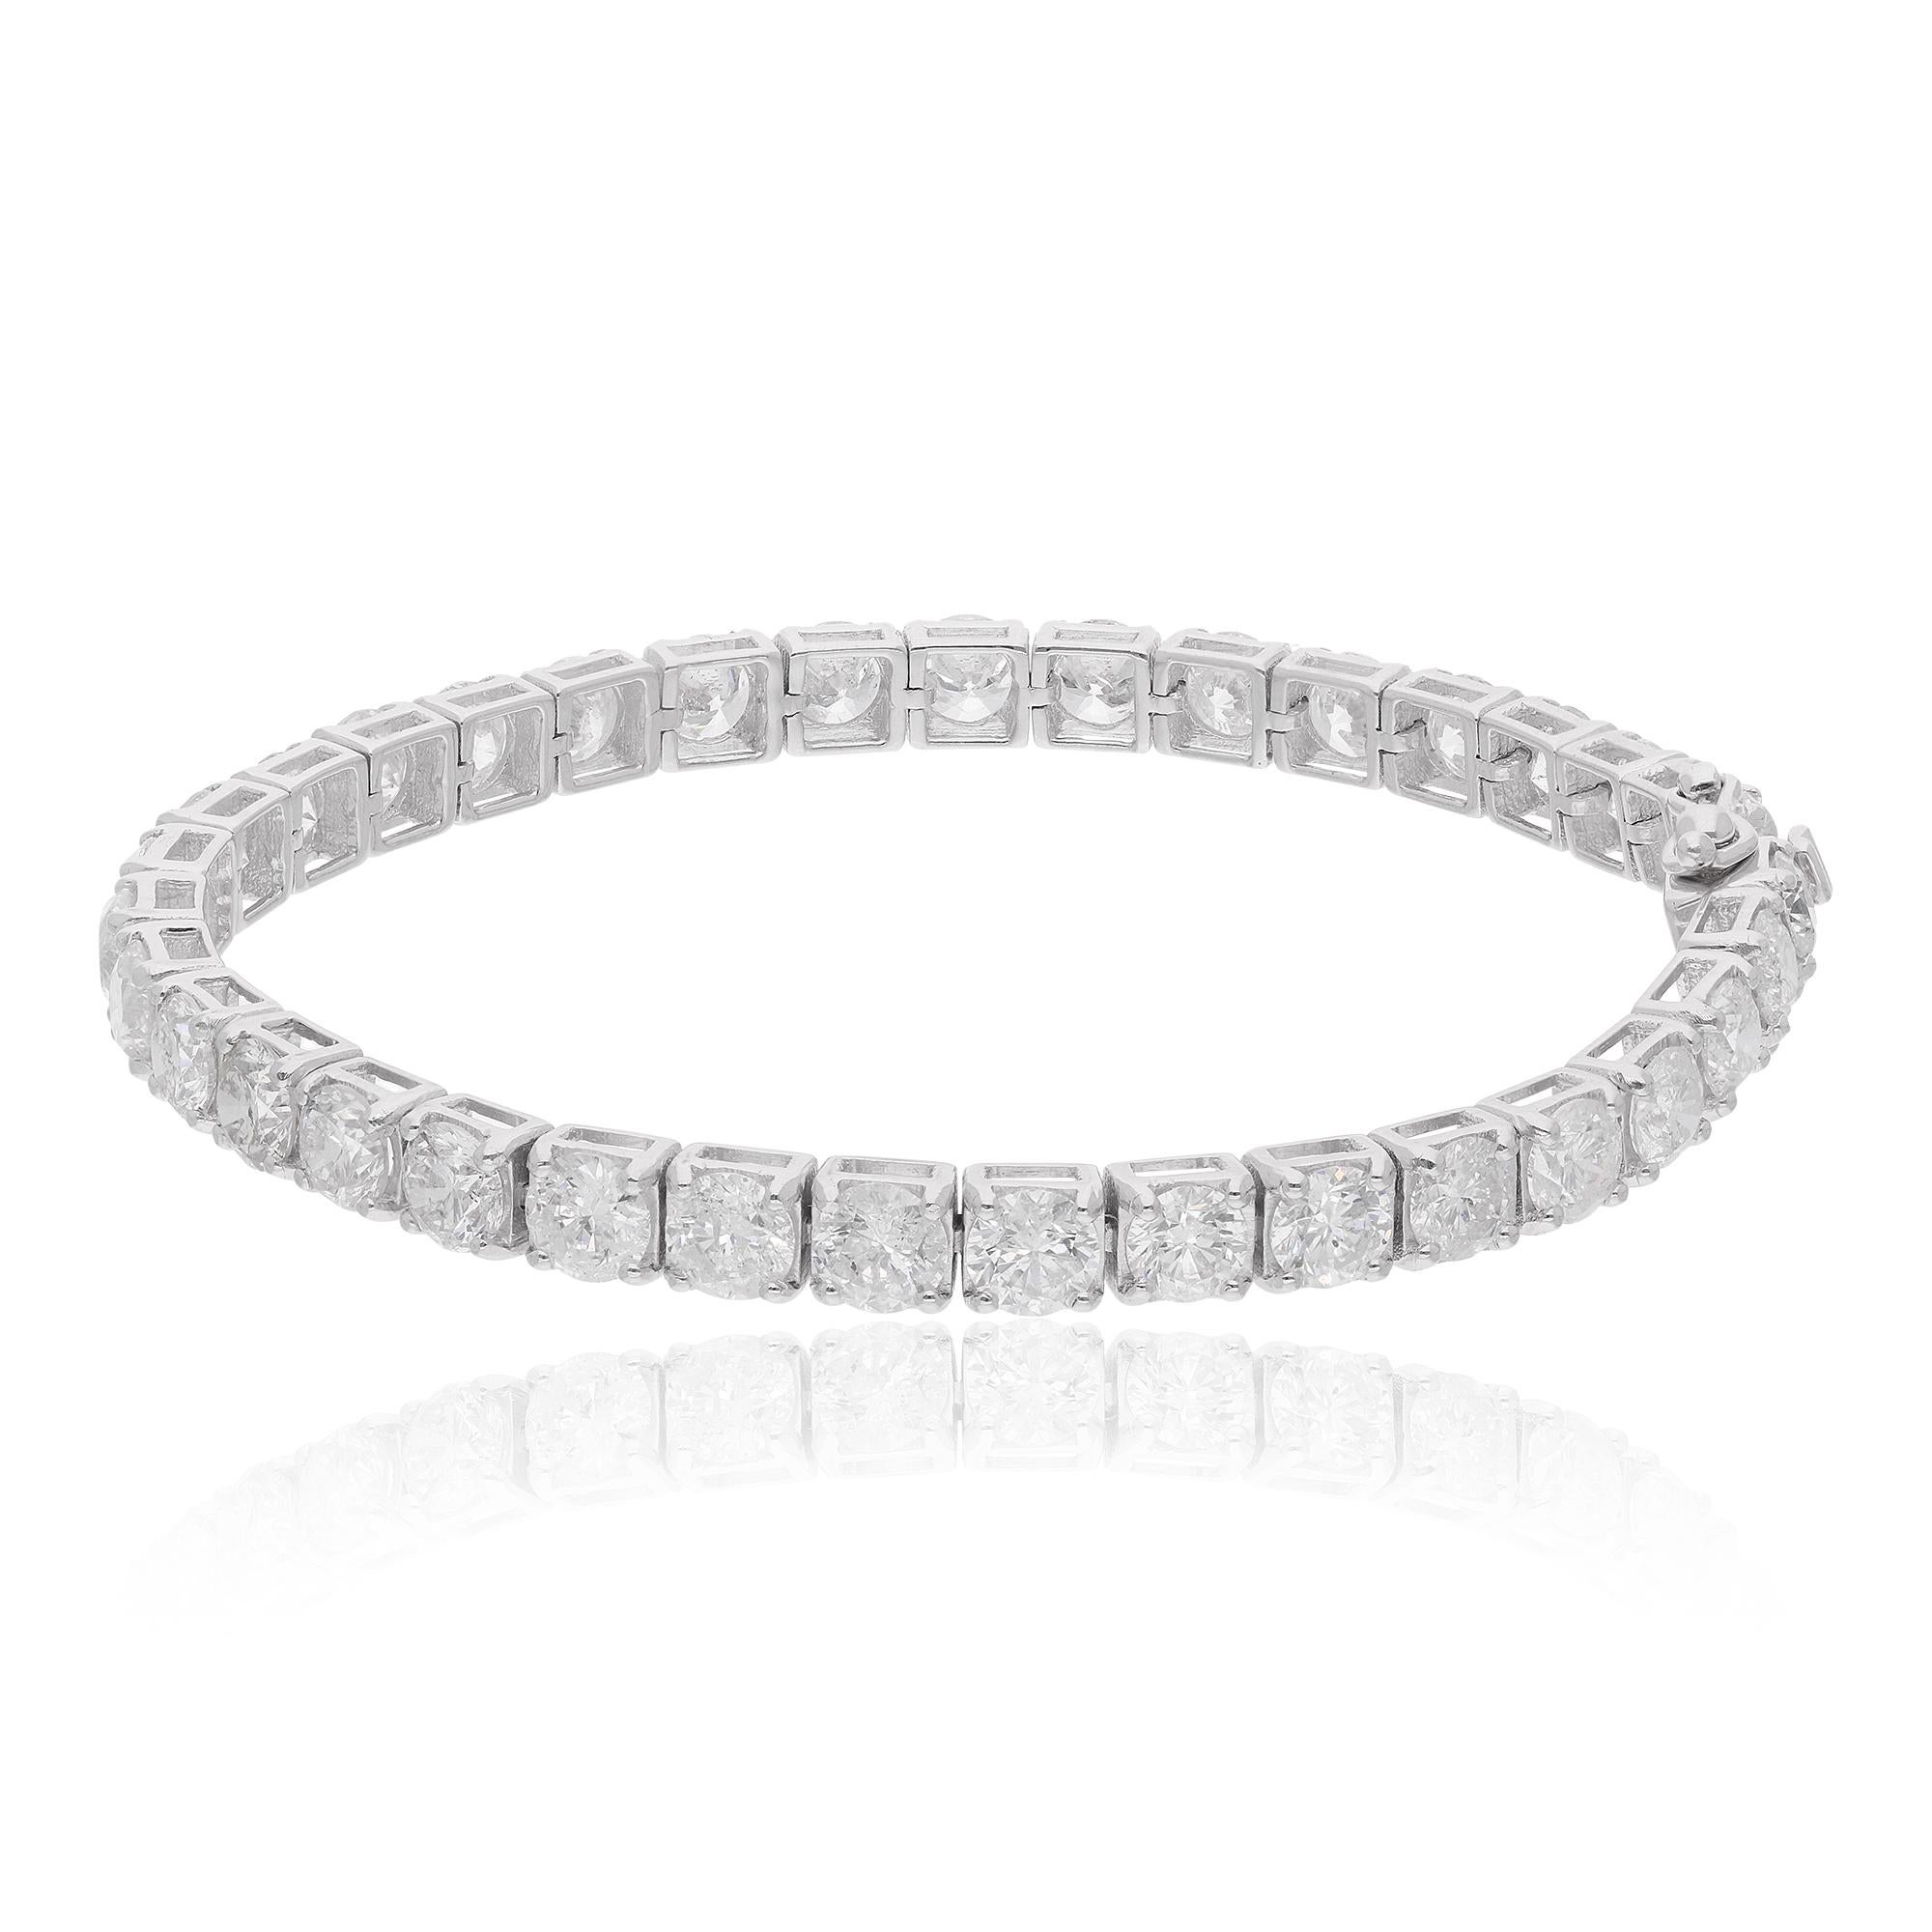 Item Code :- SEBR-43089
Gross Wt. :- 16.69 gm
18k White Gold Wt. :- 13.95 gm
Natural Diamond Wt. :- 13.68 Ct. ( AVERAGE DIAMOND CLARITY SI1-SI2 & COLOR H-I )
Bracelet Length :- 7 Inches Long

✦ Sizing
.....................
We can adjust most items